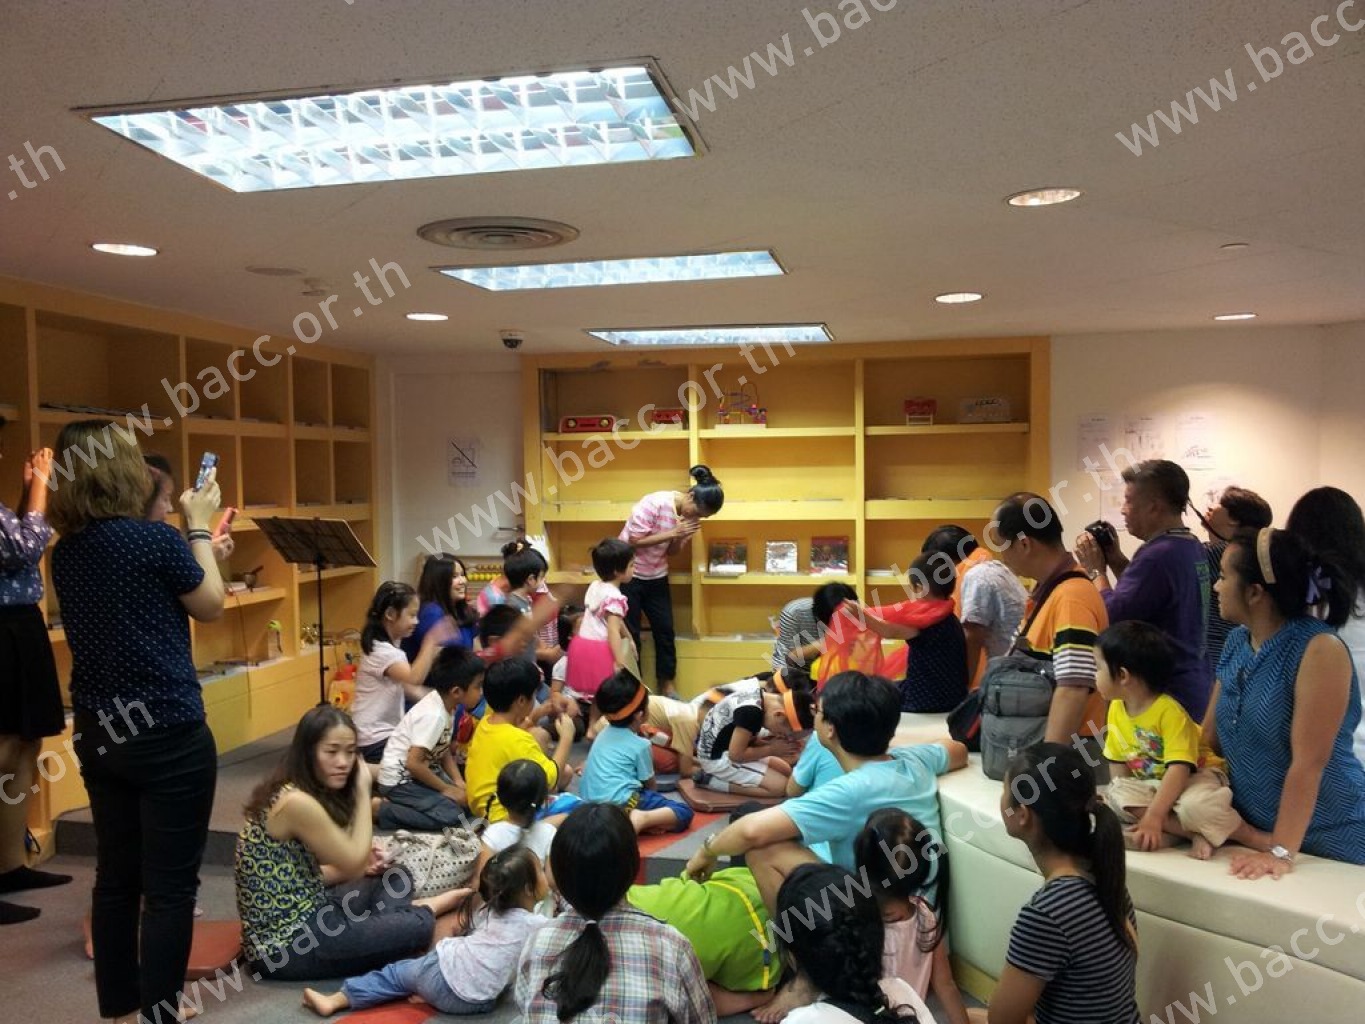 Storytelling Activity for Kids, Asean Tales : “The Shark That Lost His Teeth”